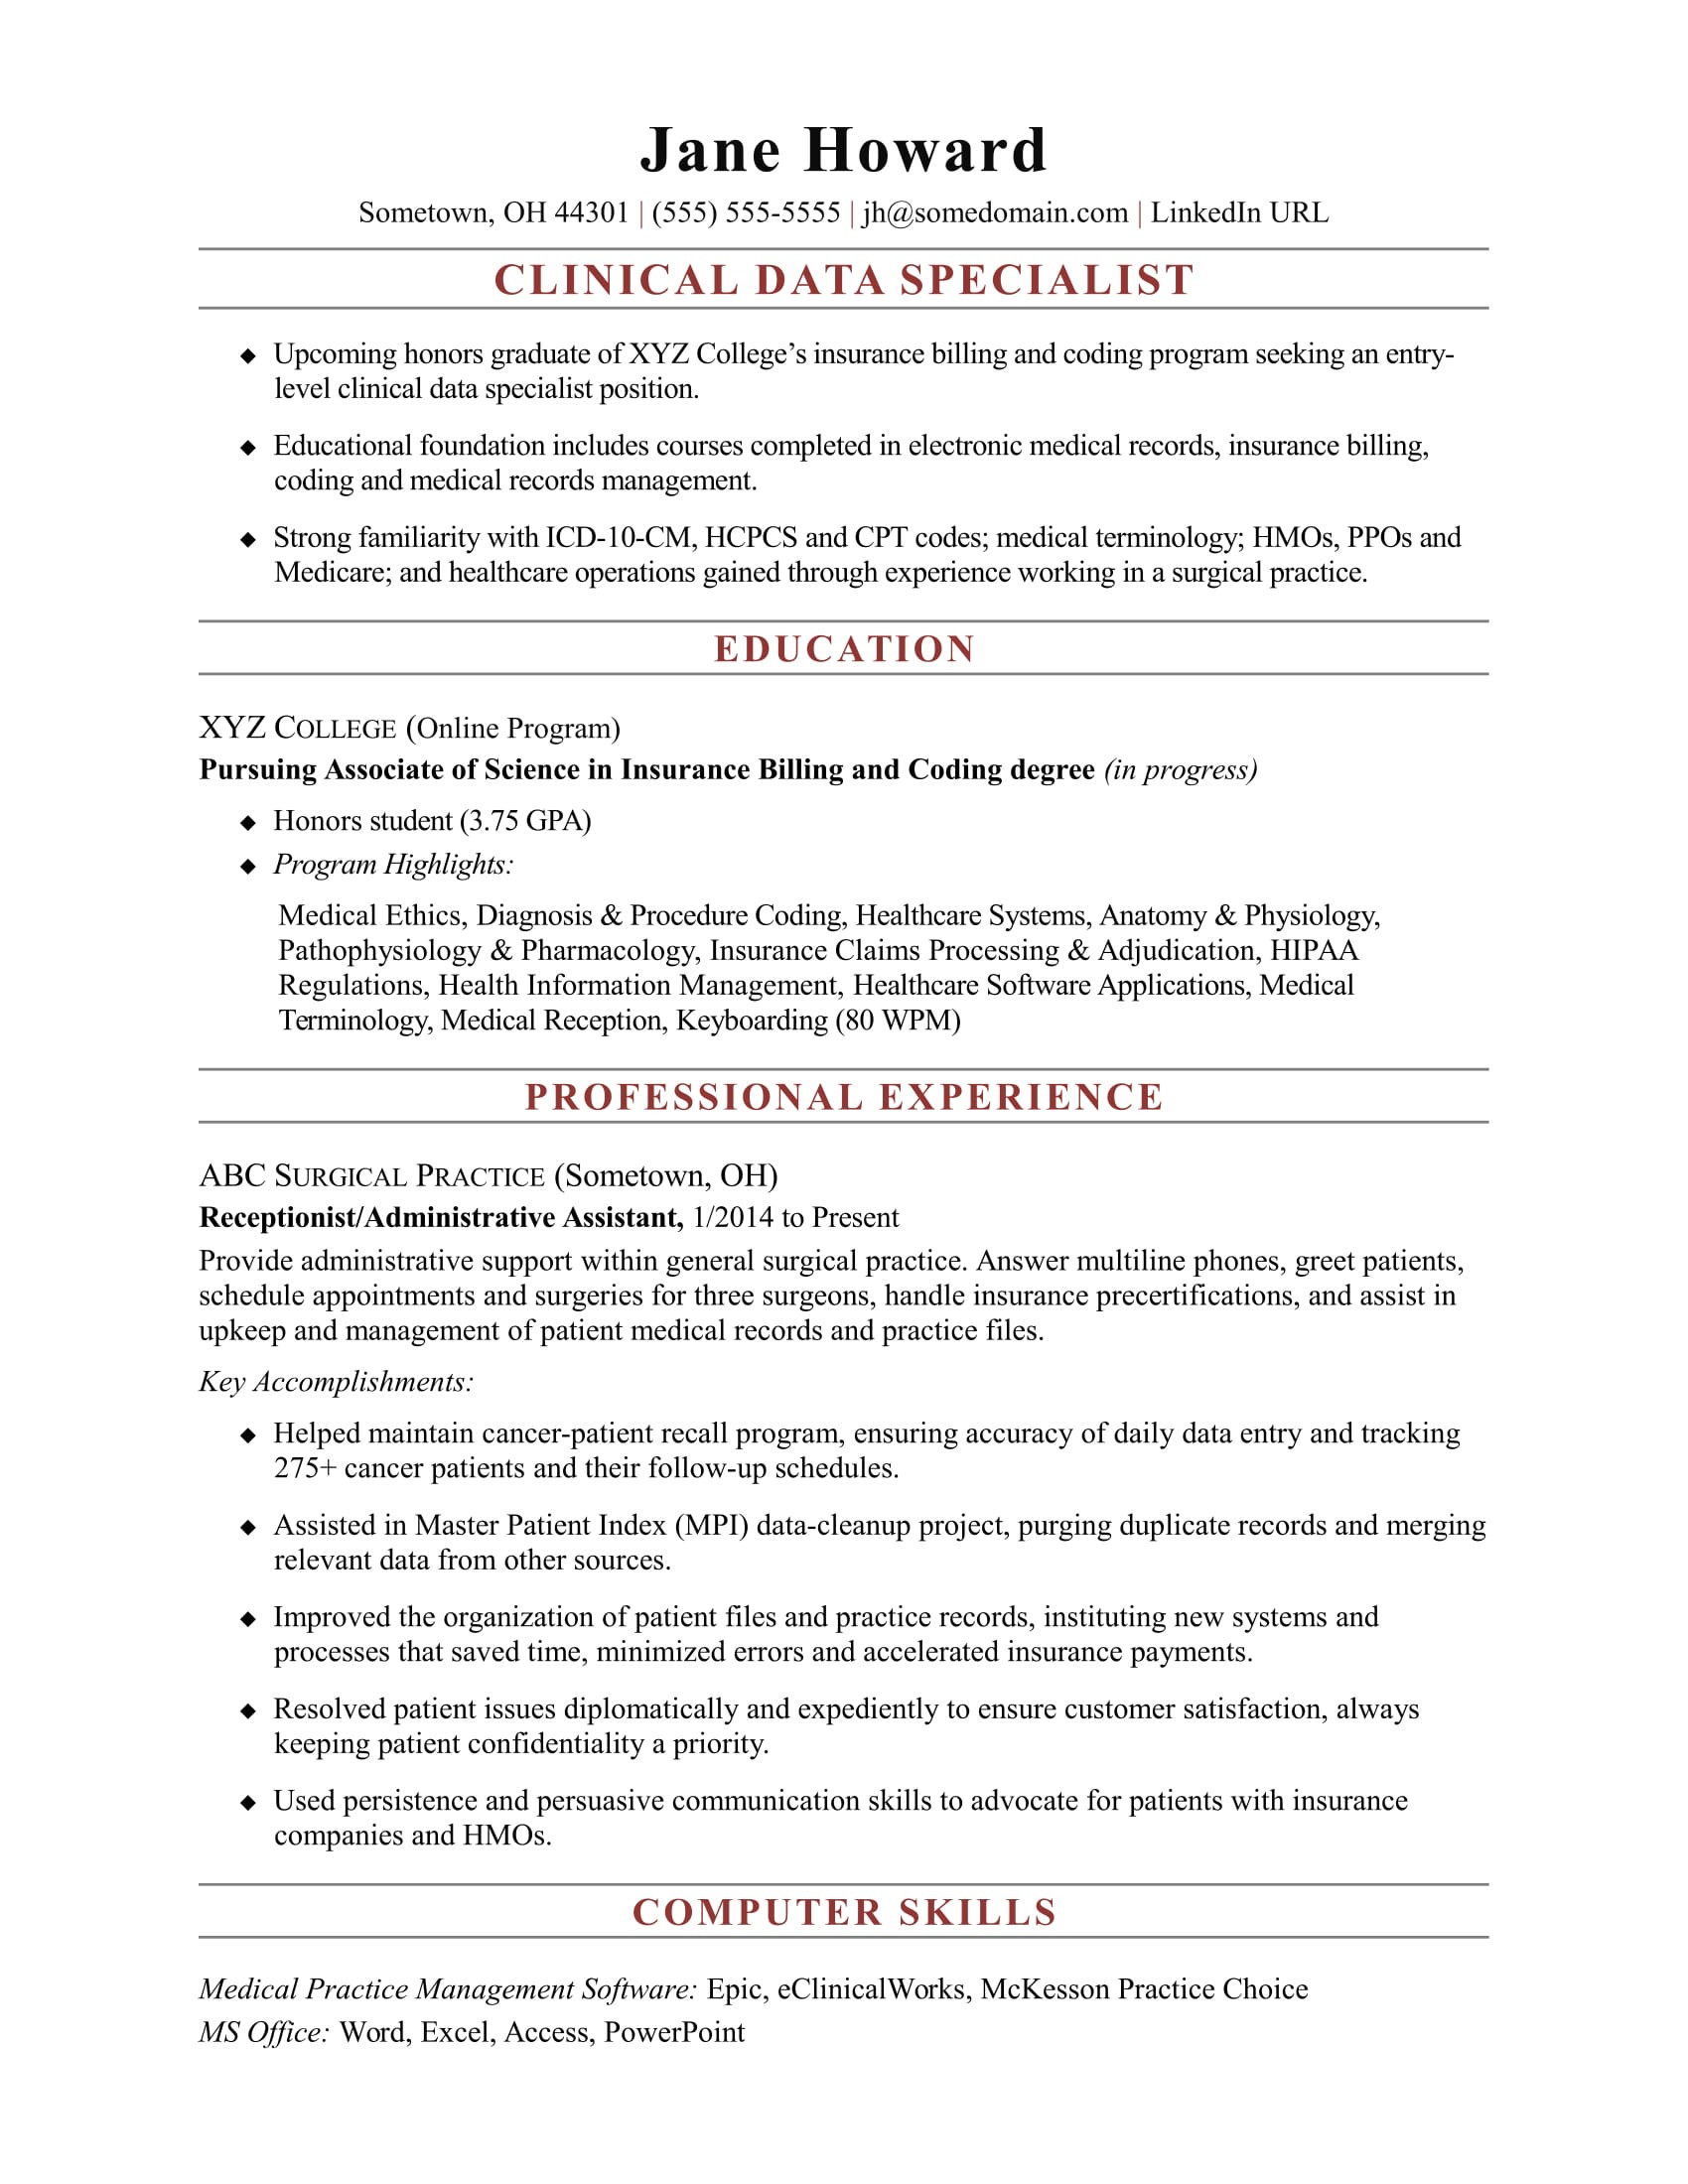 sample resume clinical data specialist entry level